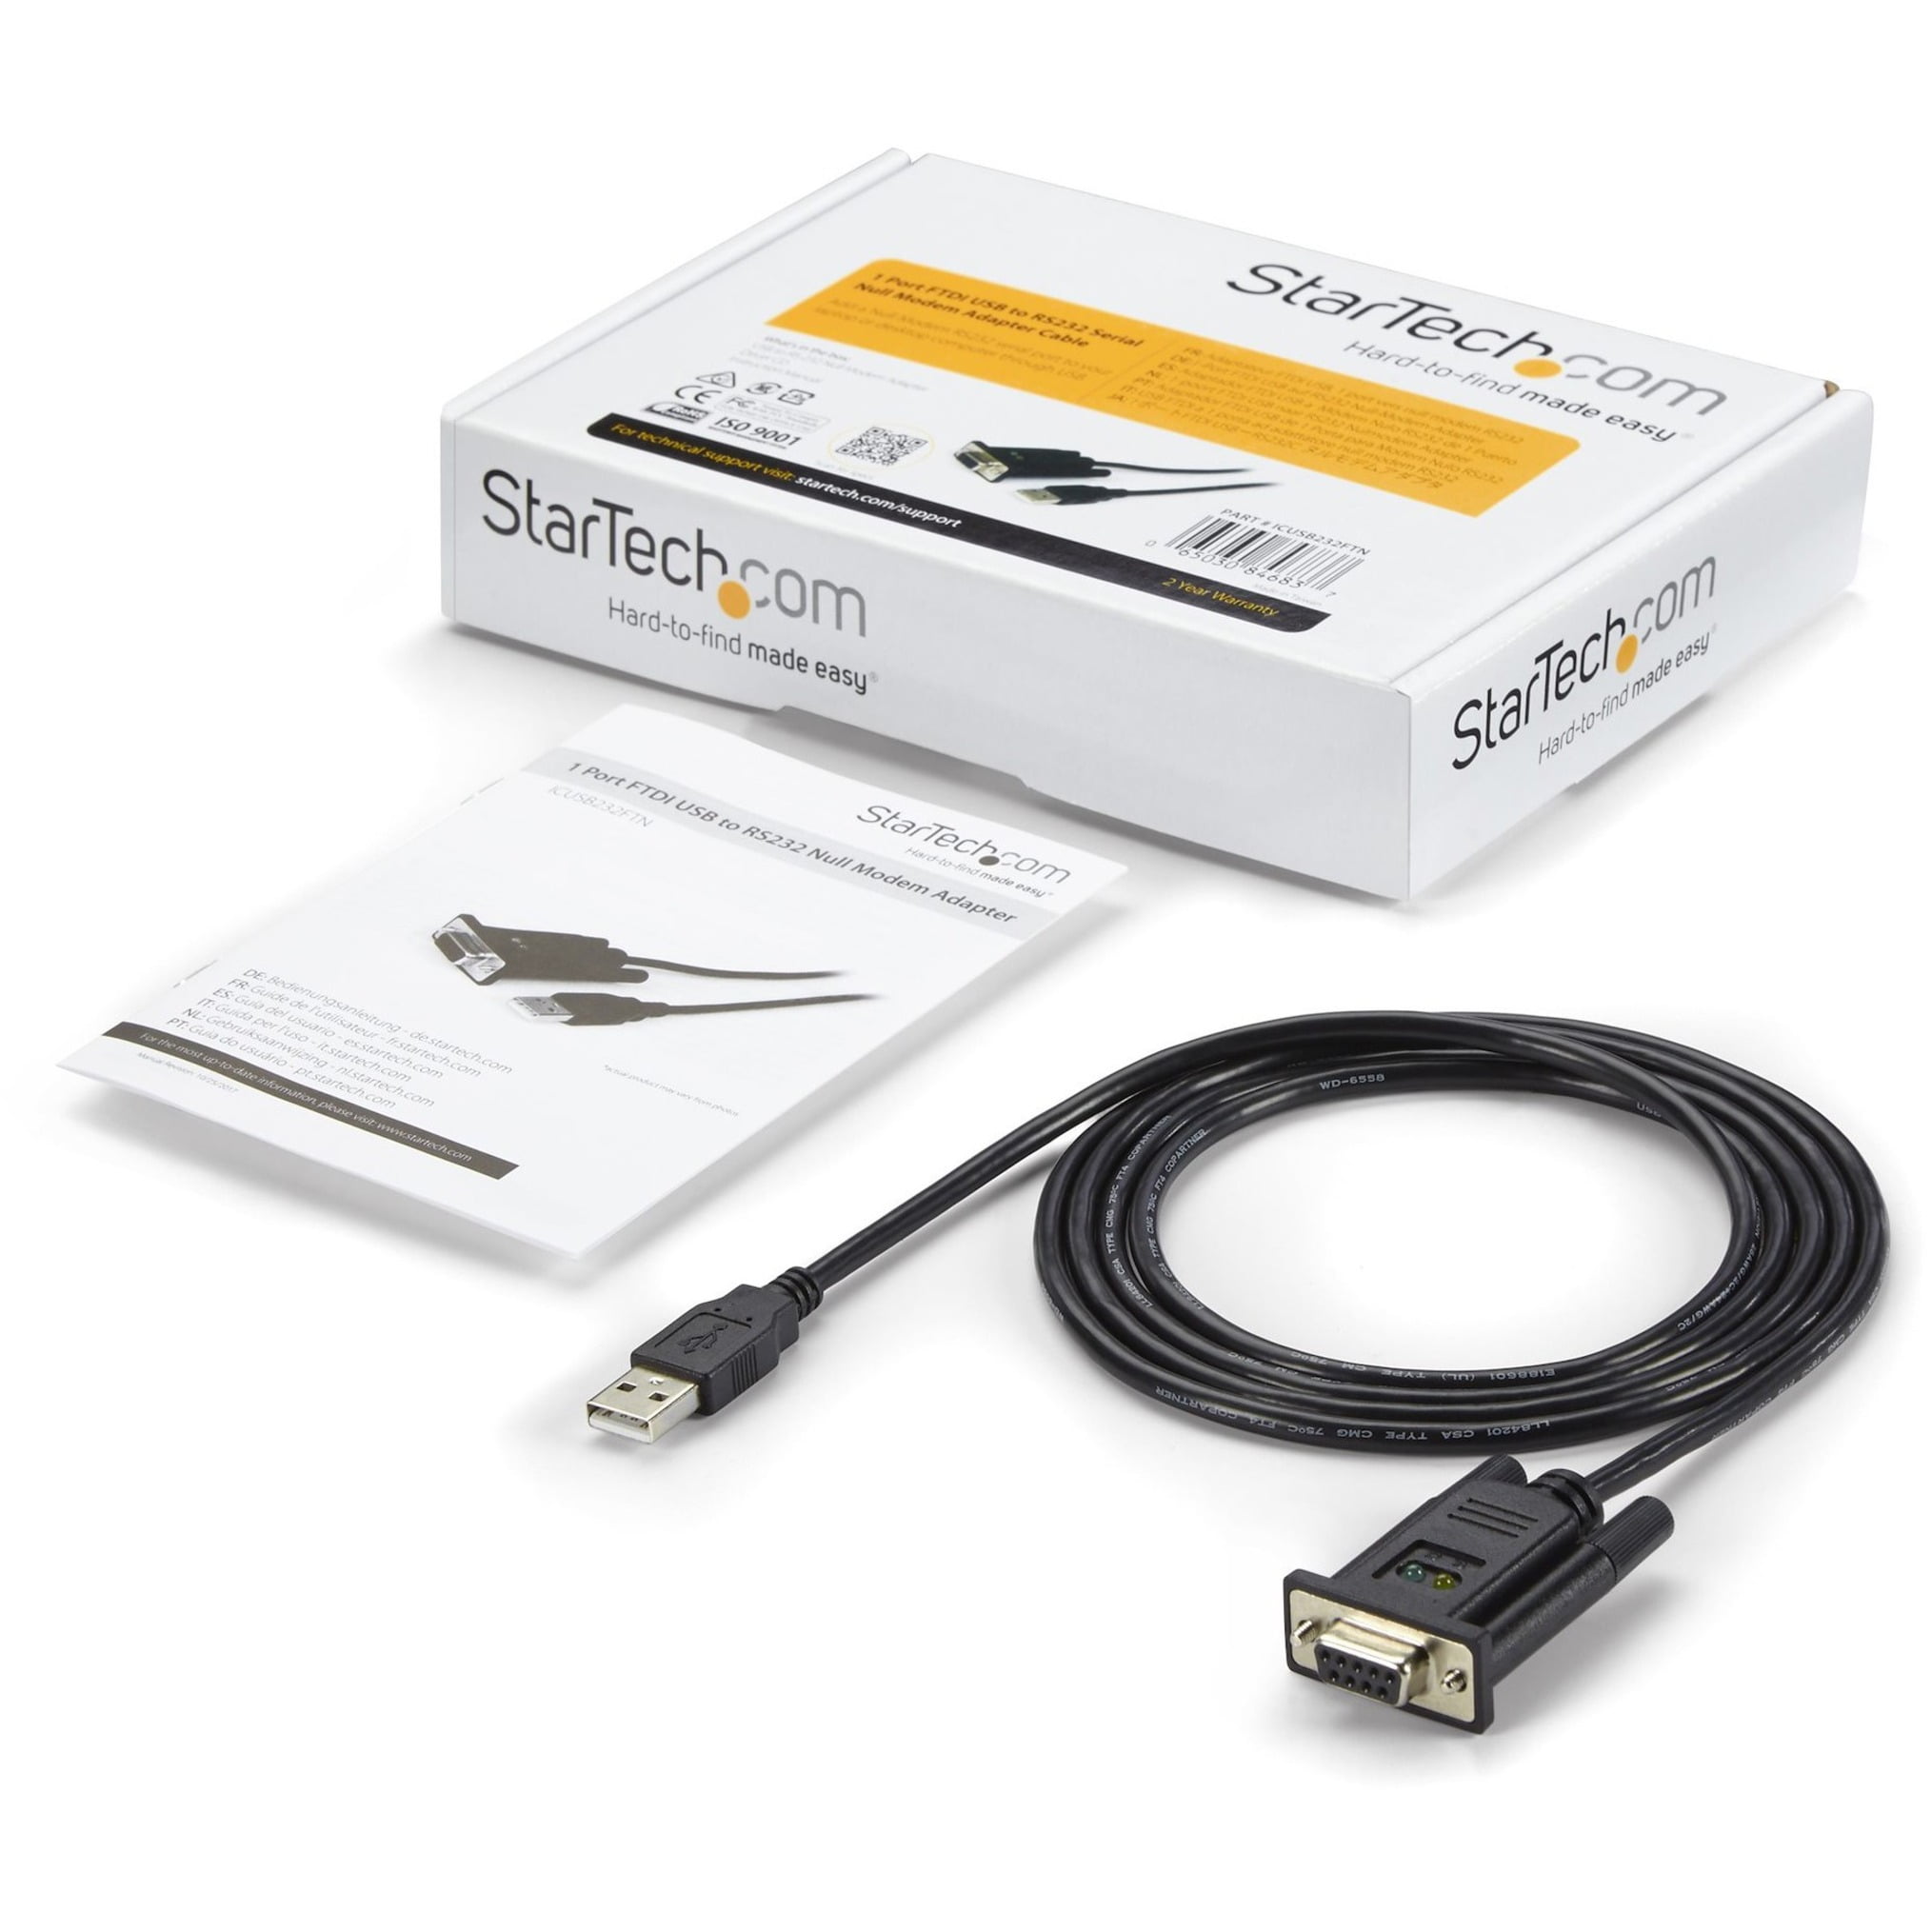 Startech Port to Null Modem RS232 DB9 Serial DCE Adapter Cable - Walmart.com